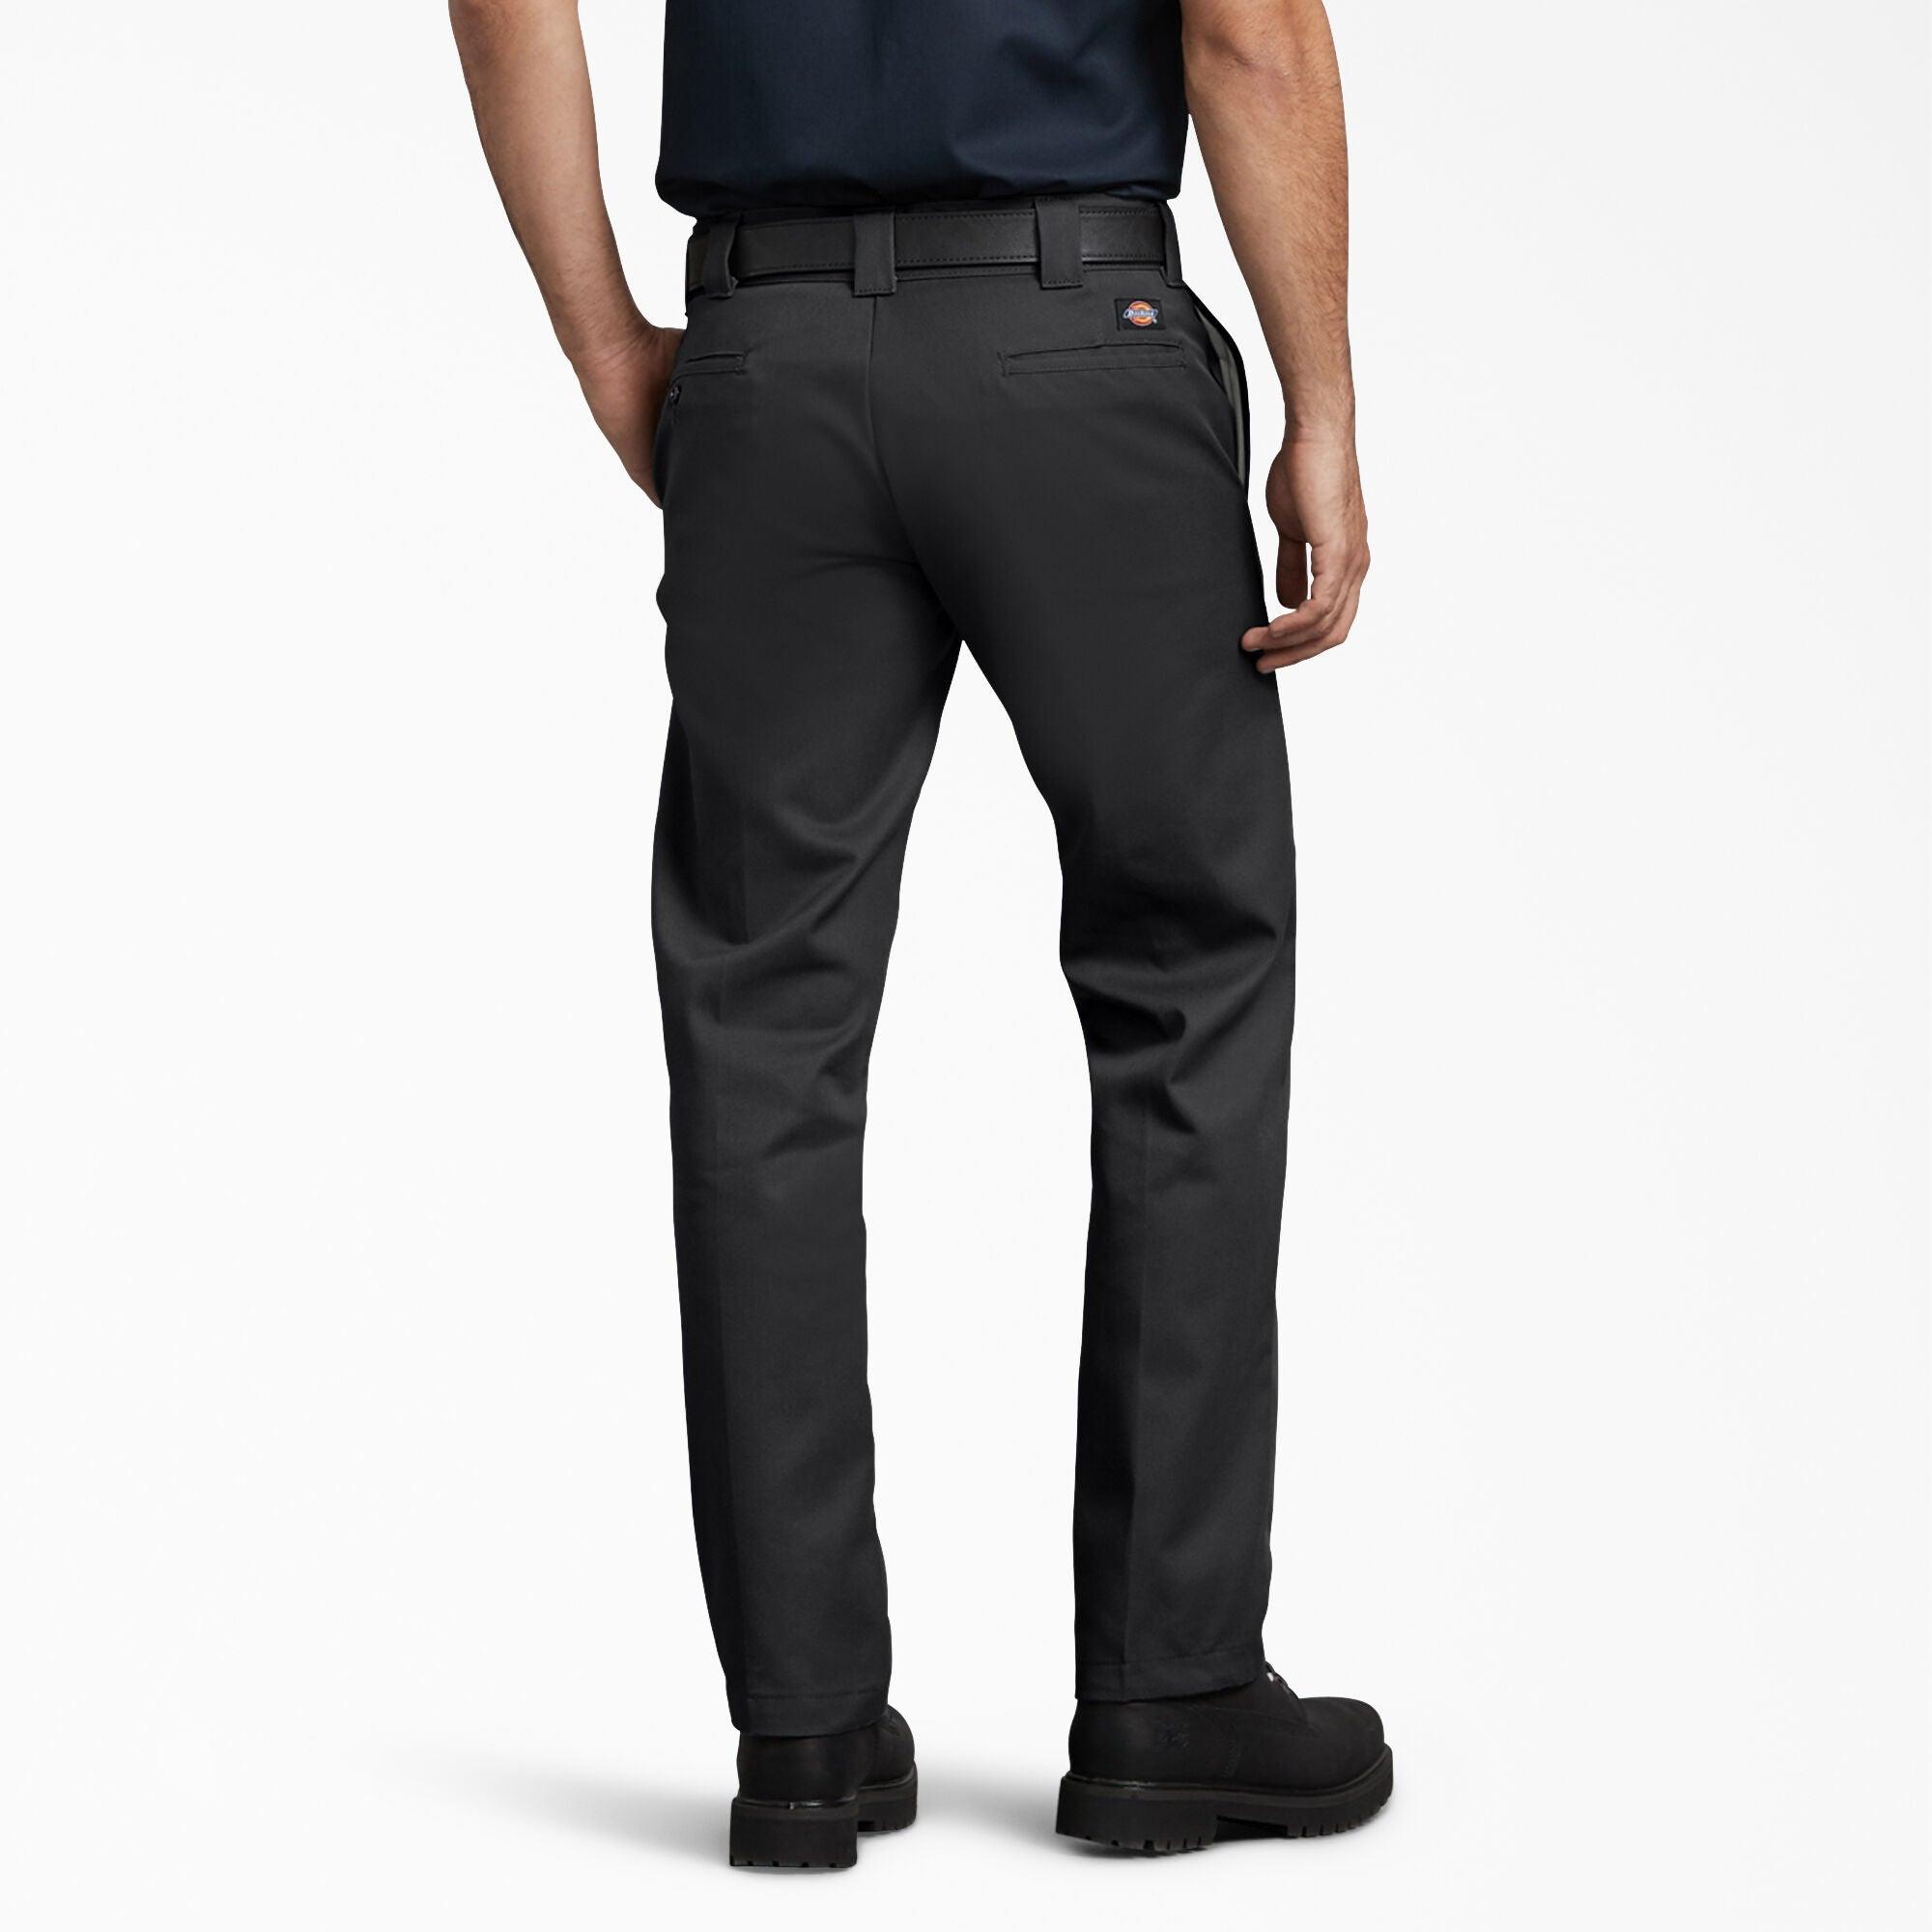 Slim Fit Work Pants, Black - Purpose-Built / Home of the Trades